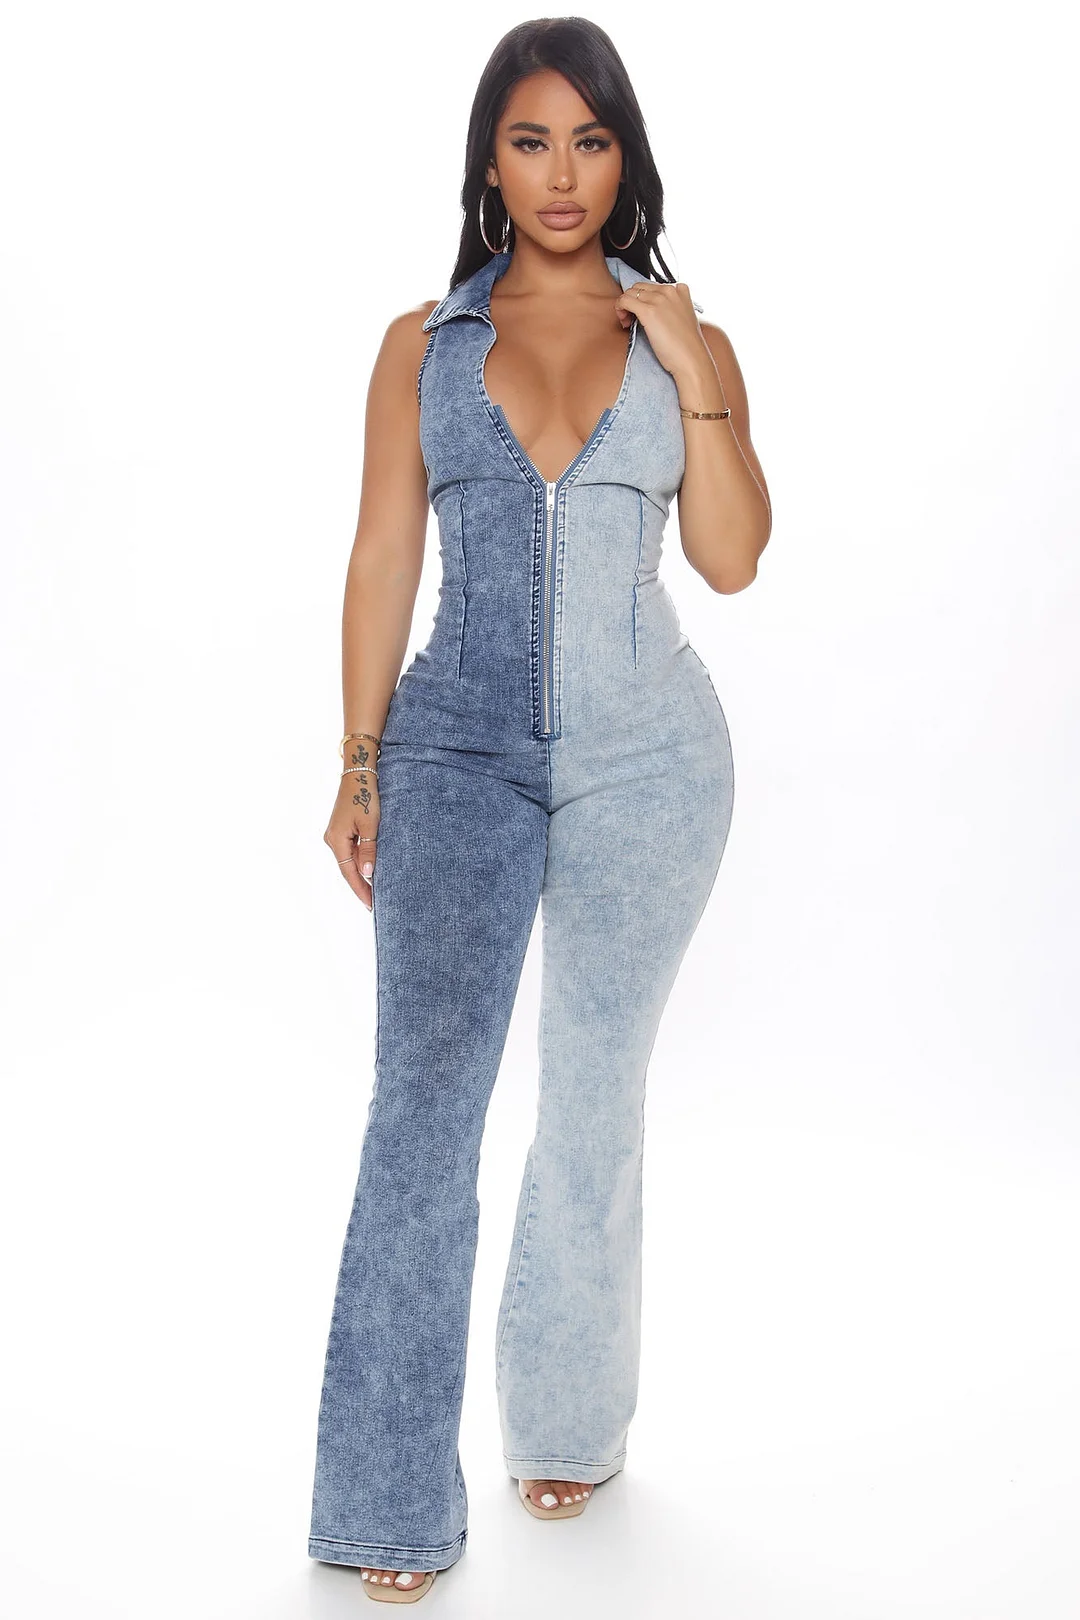 All Mixed Up Denim Jumpsuit - Blue/combo